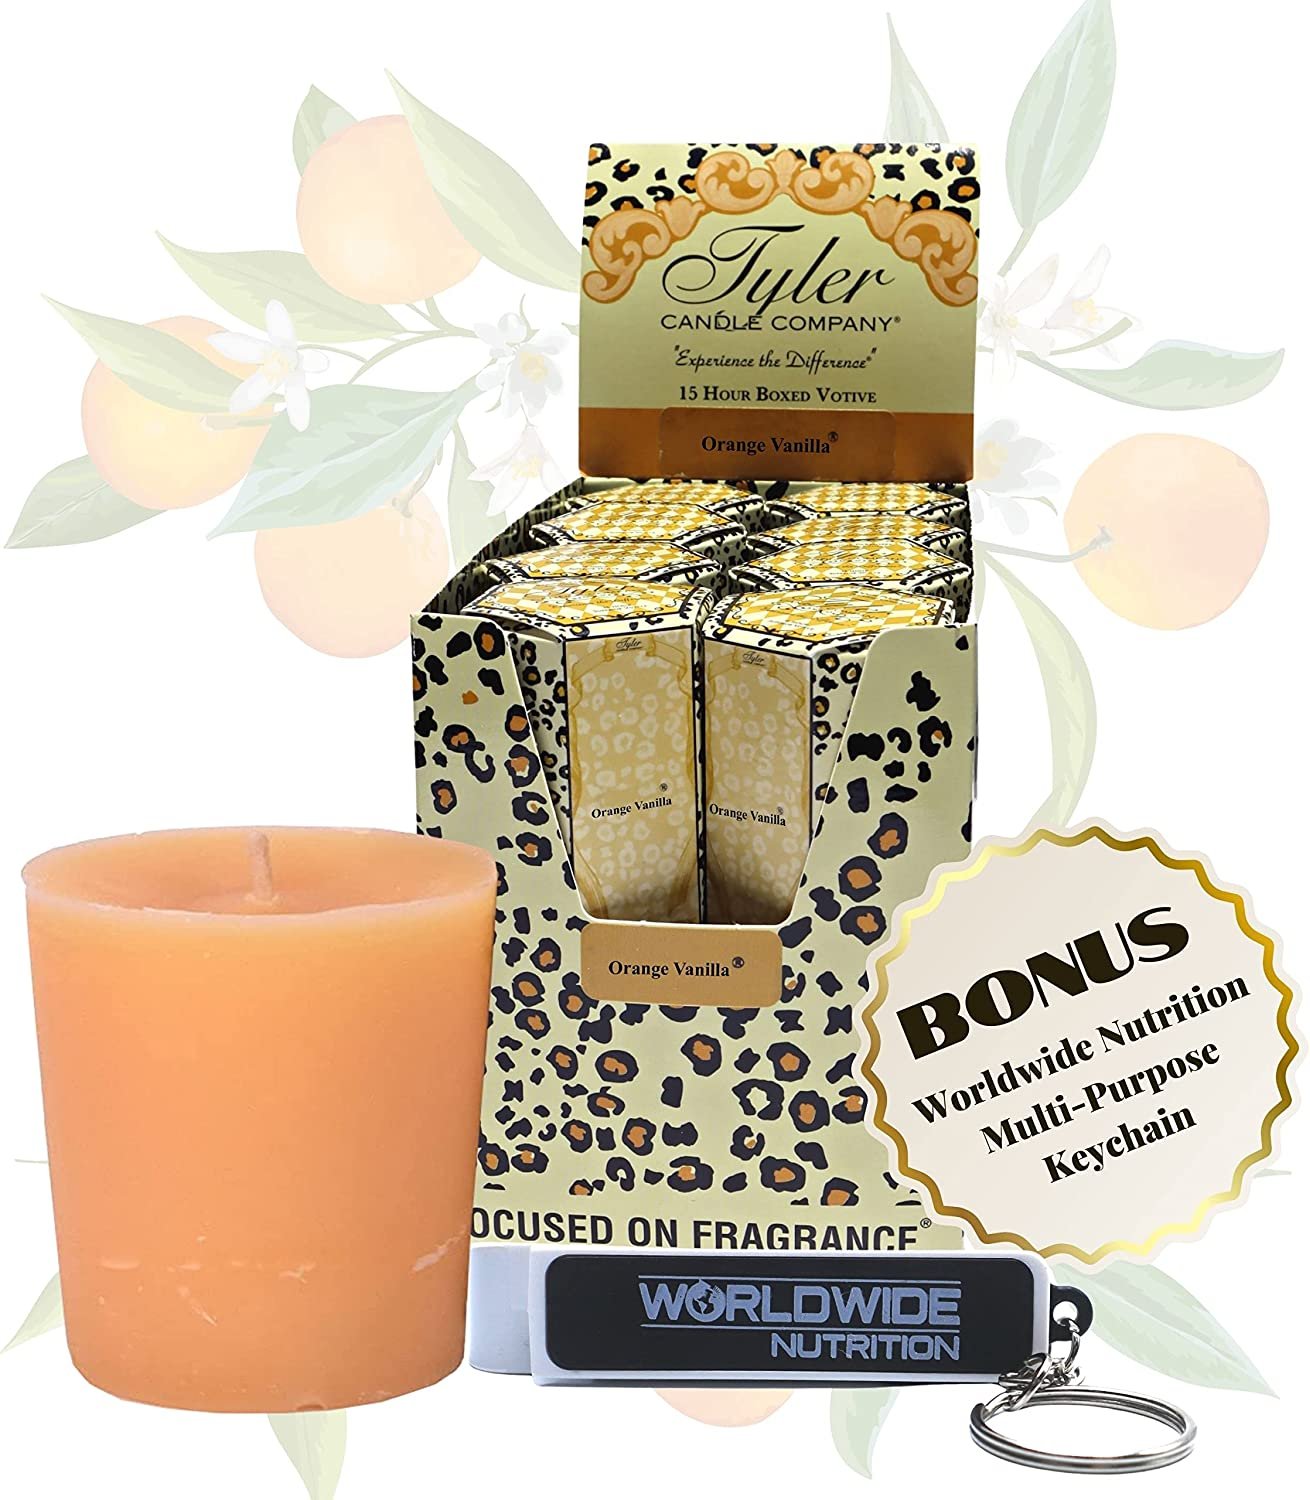 Tyler Candle Company Orange Vanilla Votive Candles - Luxury Scented Candle with Essential Oils - 16 Pack of 2 oz Small Candles with 15 Hour Burn Time Each - with Bonus Key Chain